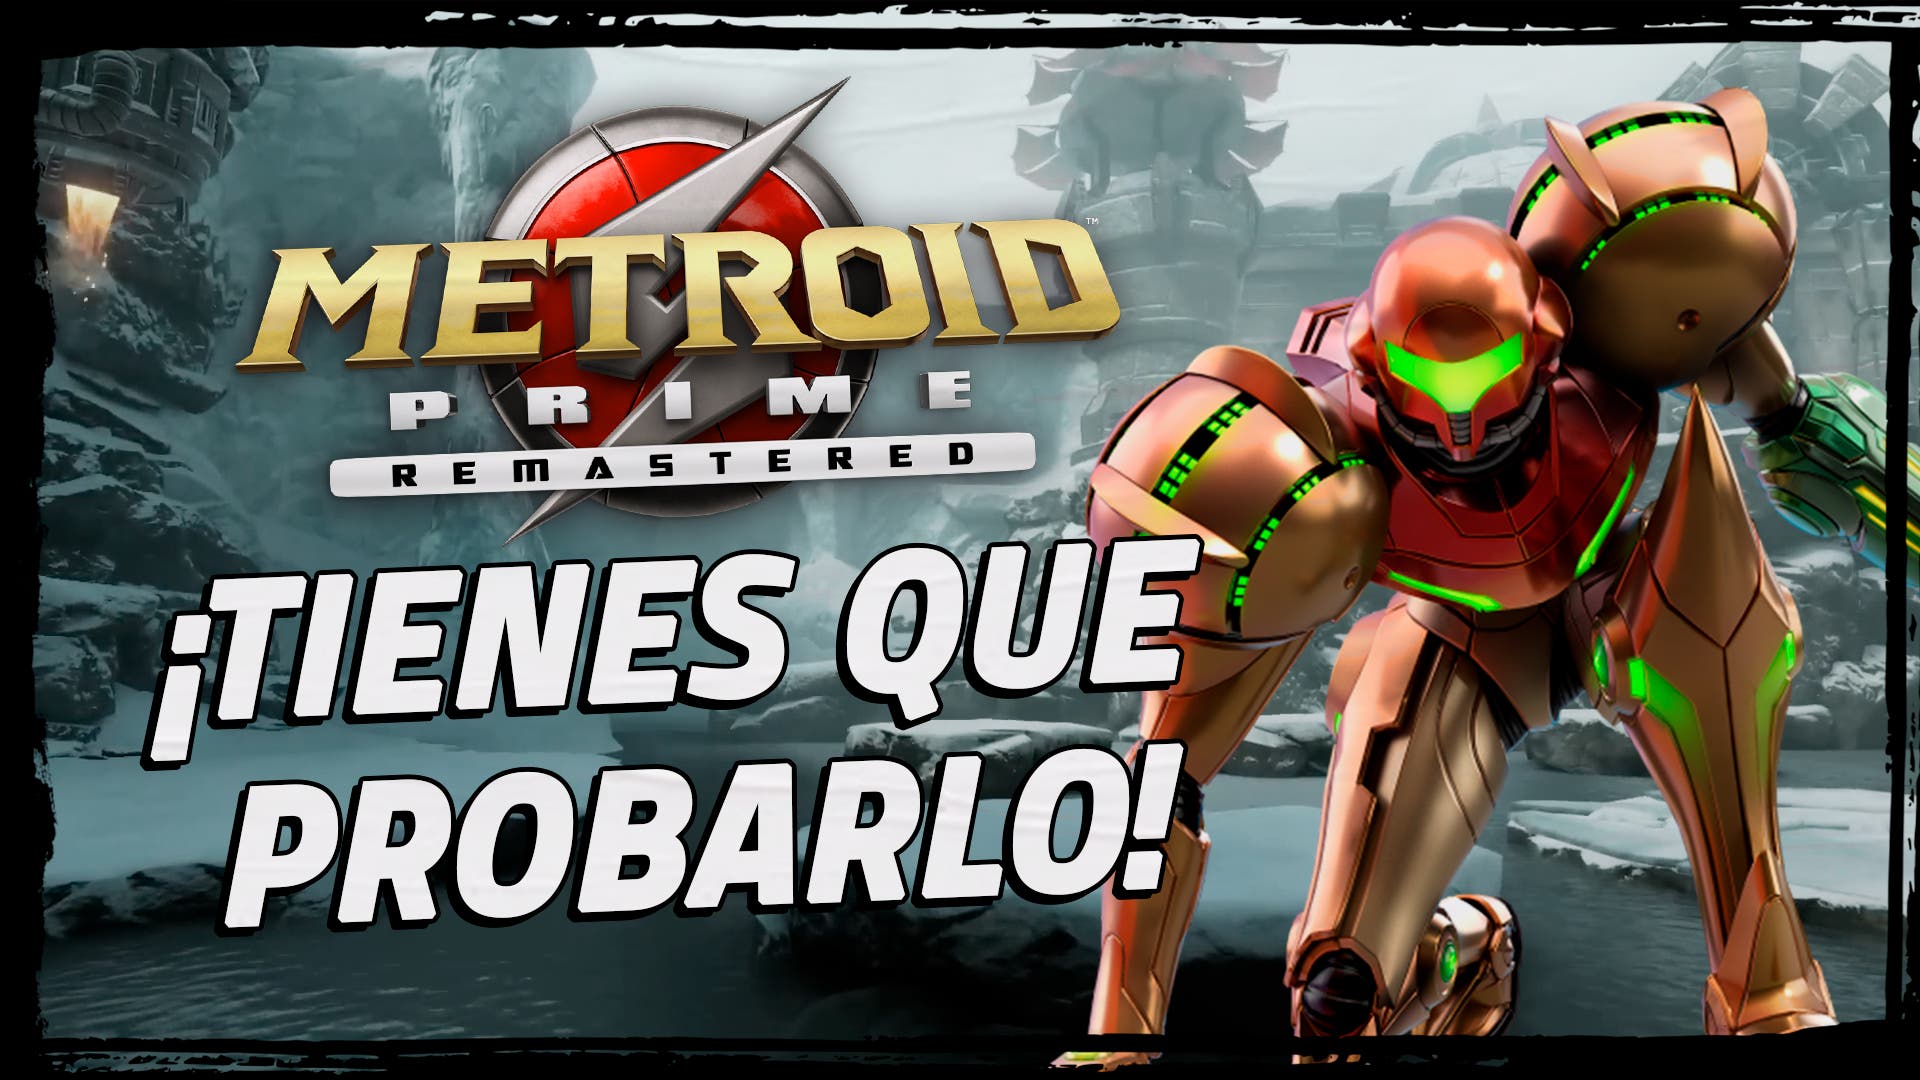 Metroid Prime Remastered: Not sure if you want to play it or not?  Watch this video!